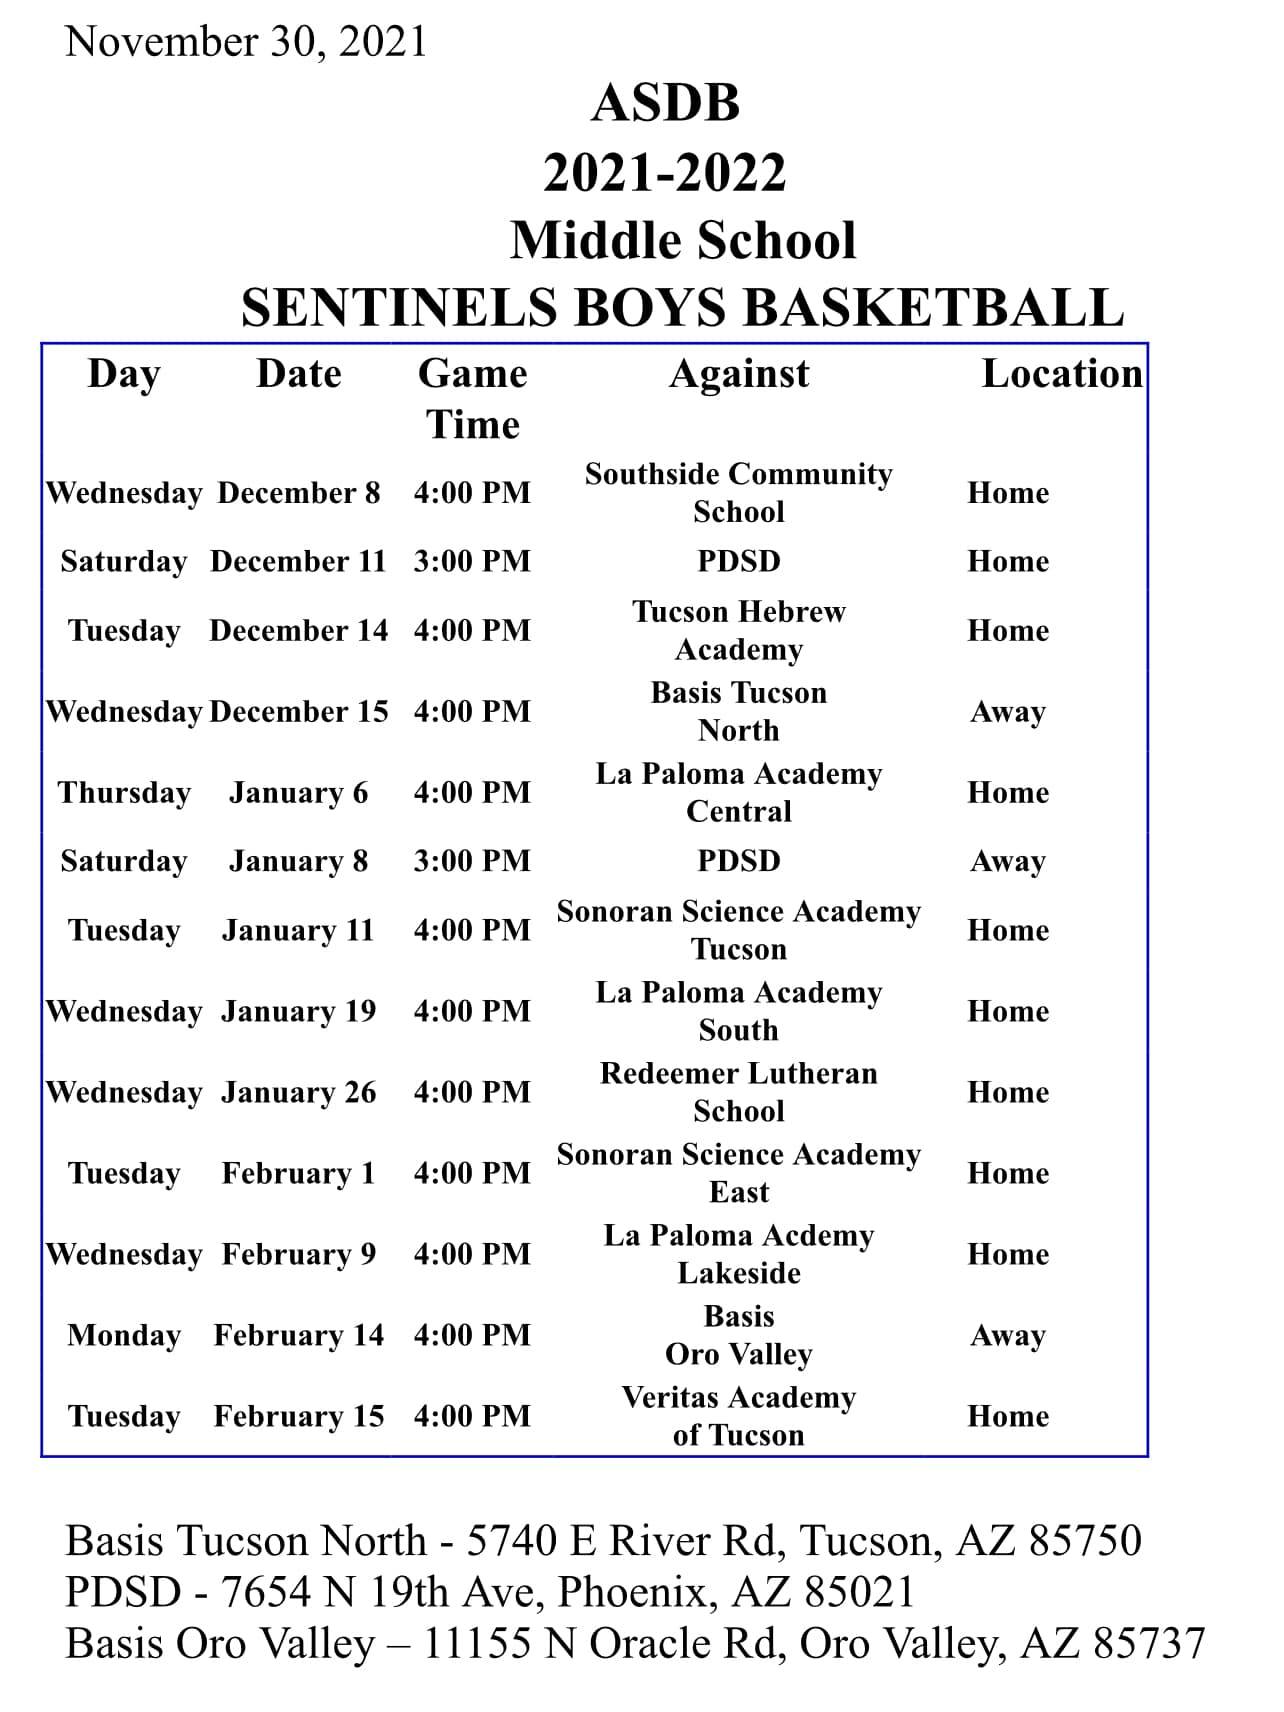 The dates and times of the Middle School boys basketball team